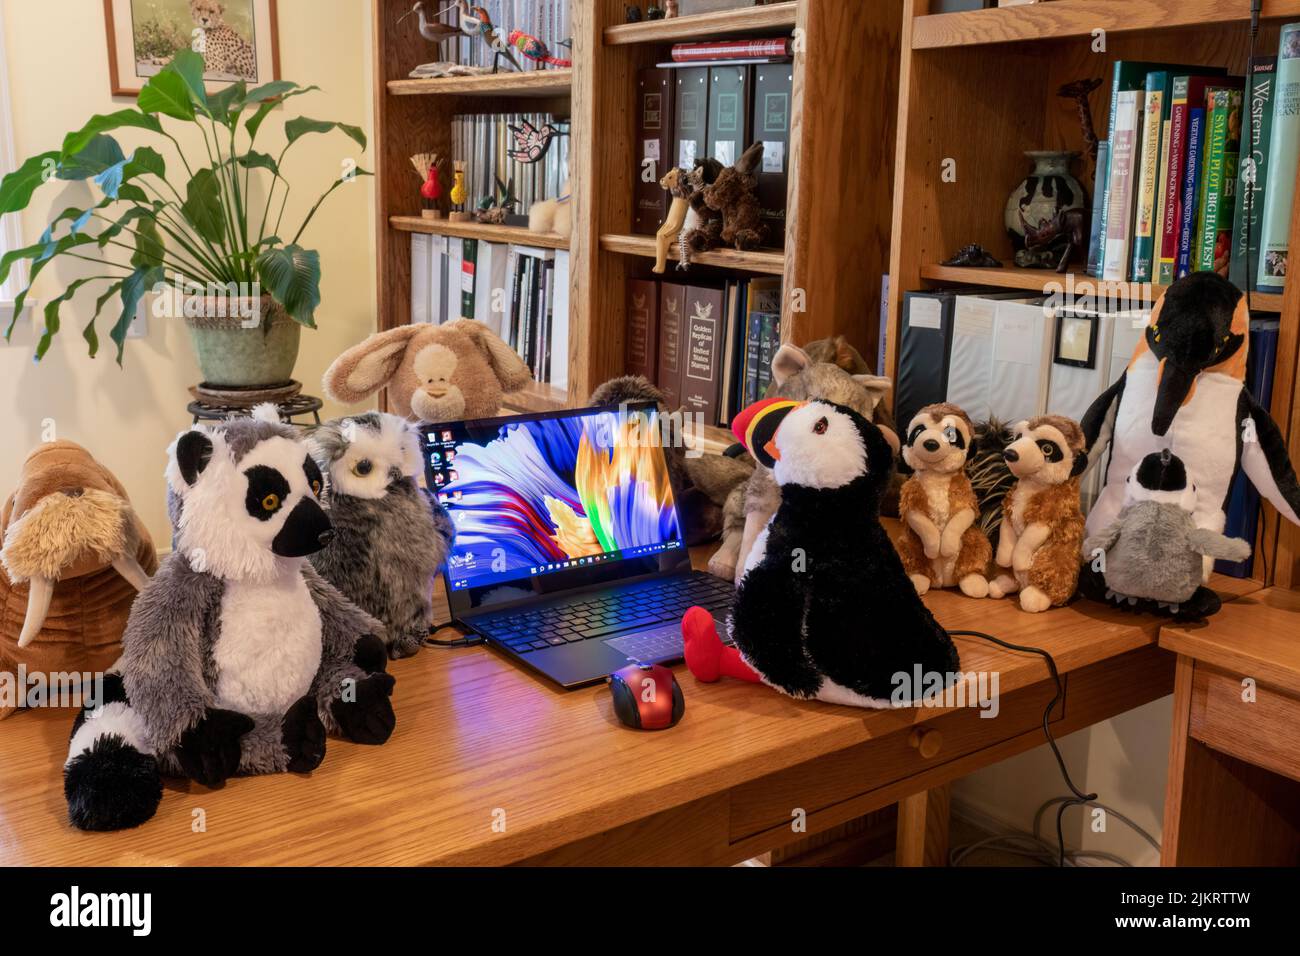 Issaquah, Washington, USA.  Laptop PC surrounded by a collection of stuffed animals, with an Atlantic Puffin gazing at the PC. Stock Photo